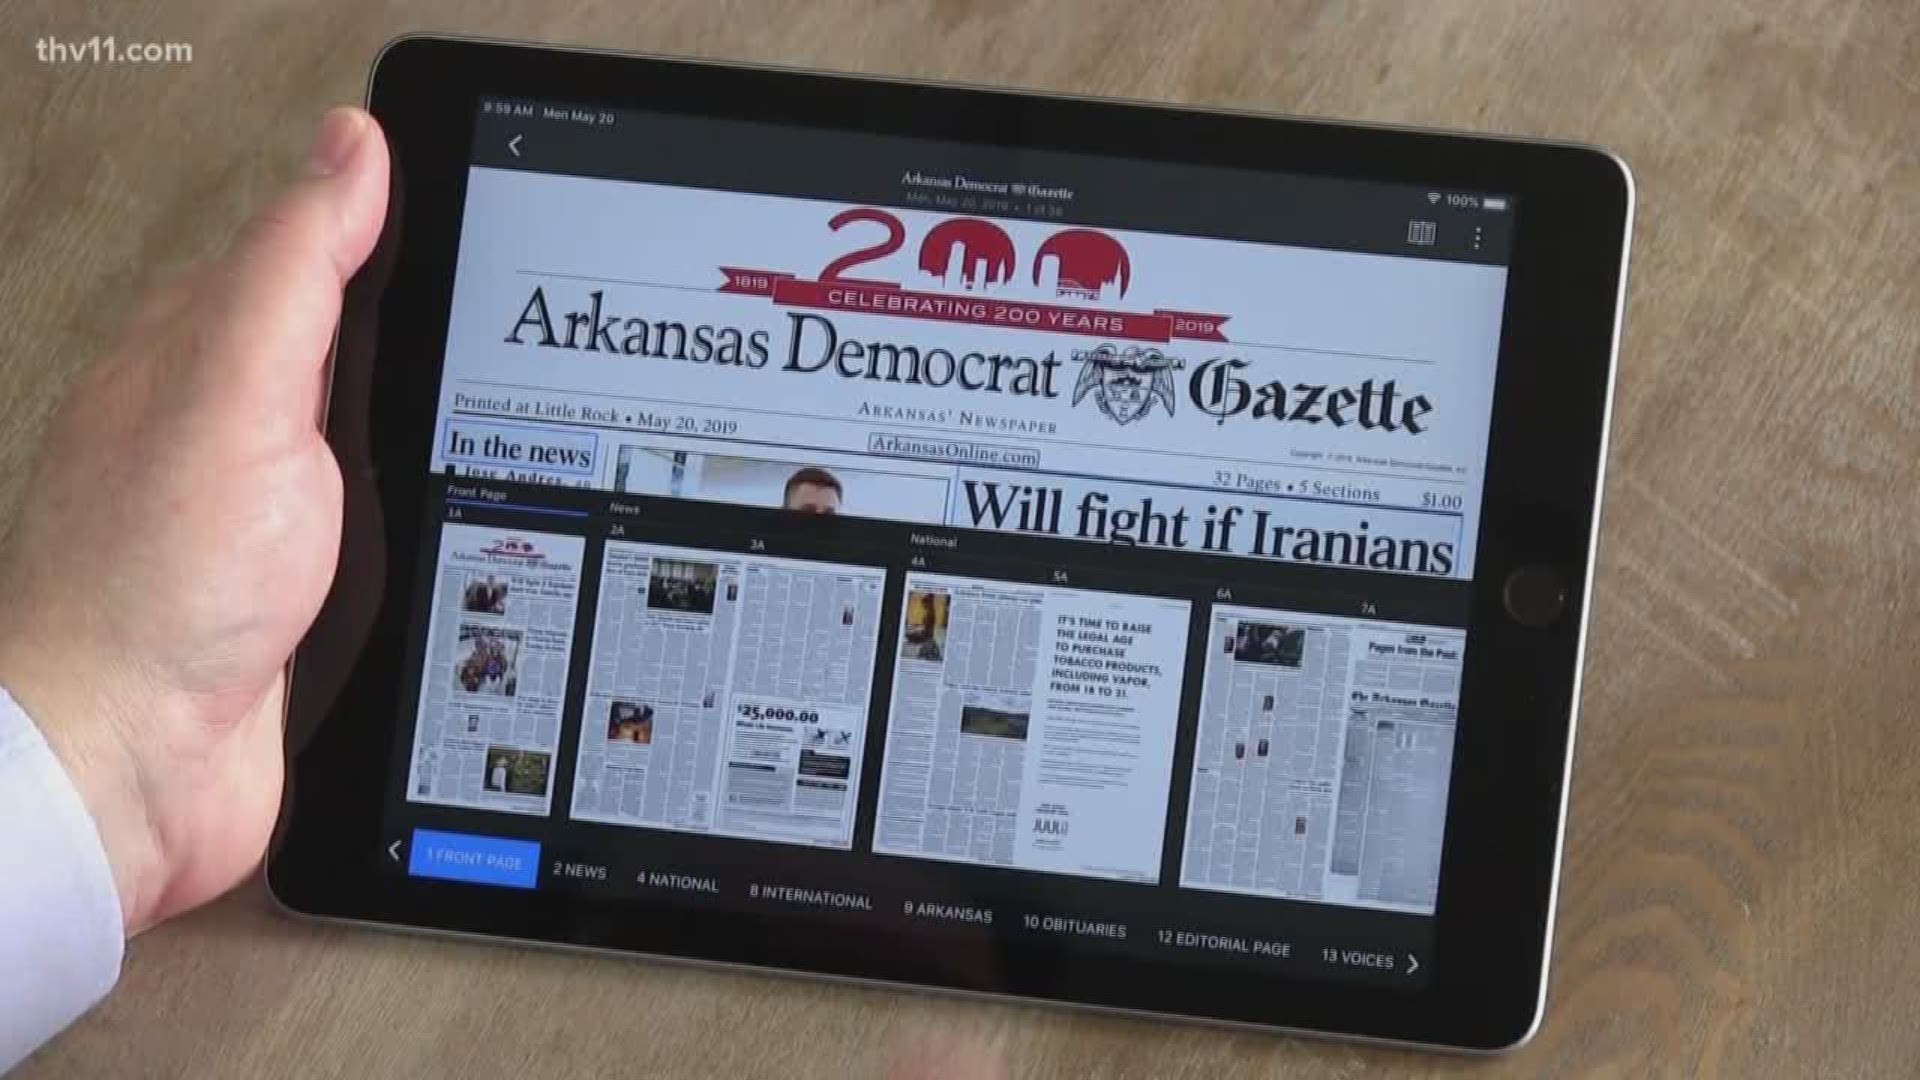 The Arkansas Democrat-Gazette has an iPad subscription service available which supplies readers with a free tablet.